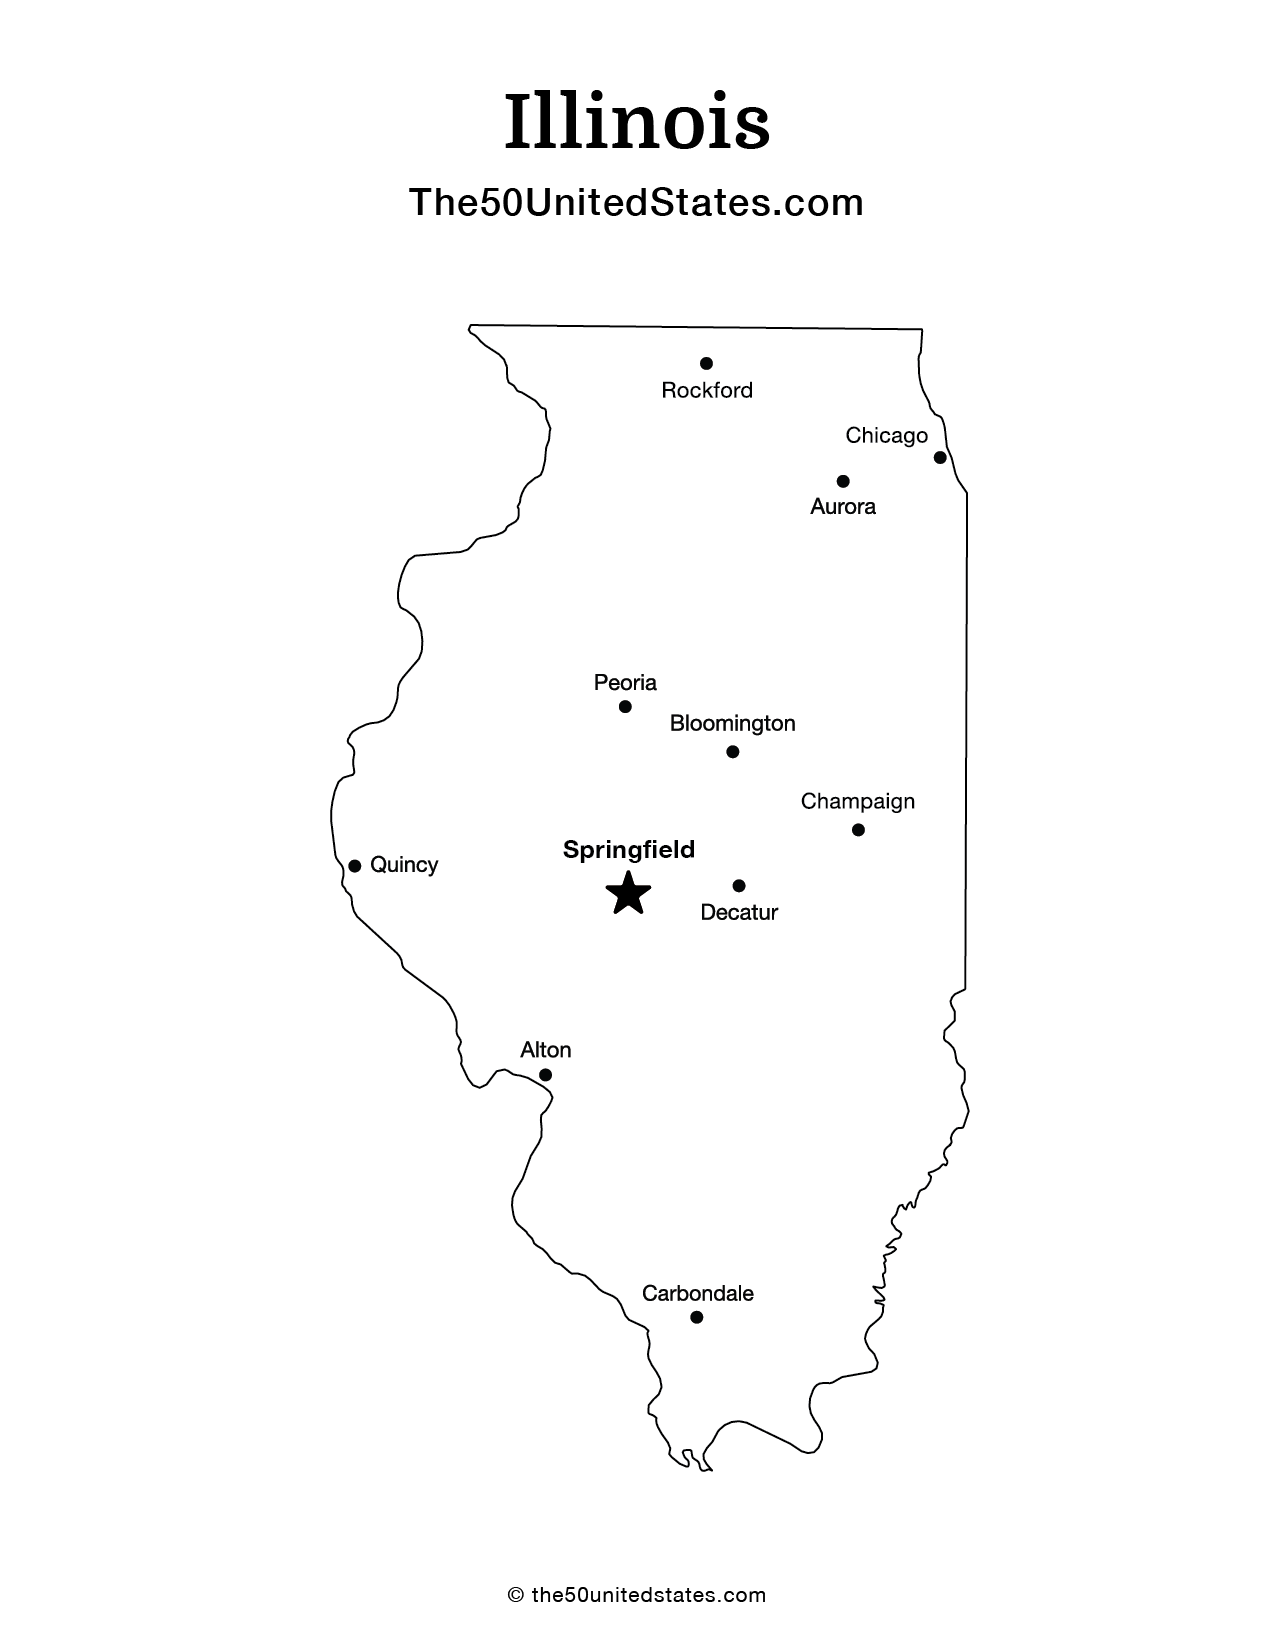 Map of Illinois with Cities (Labeled)